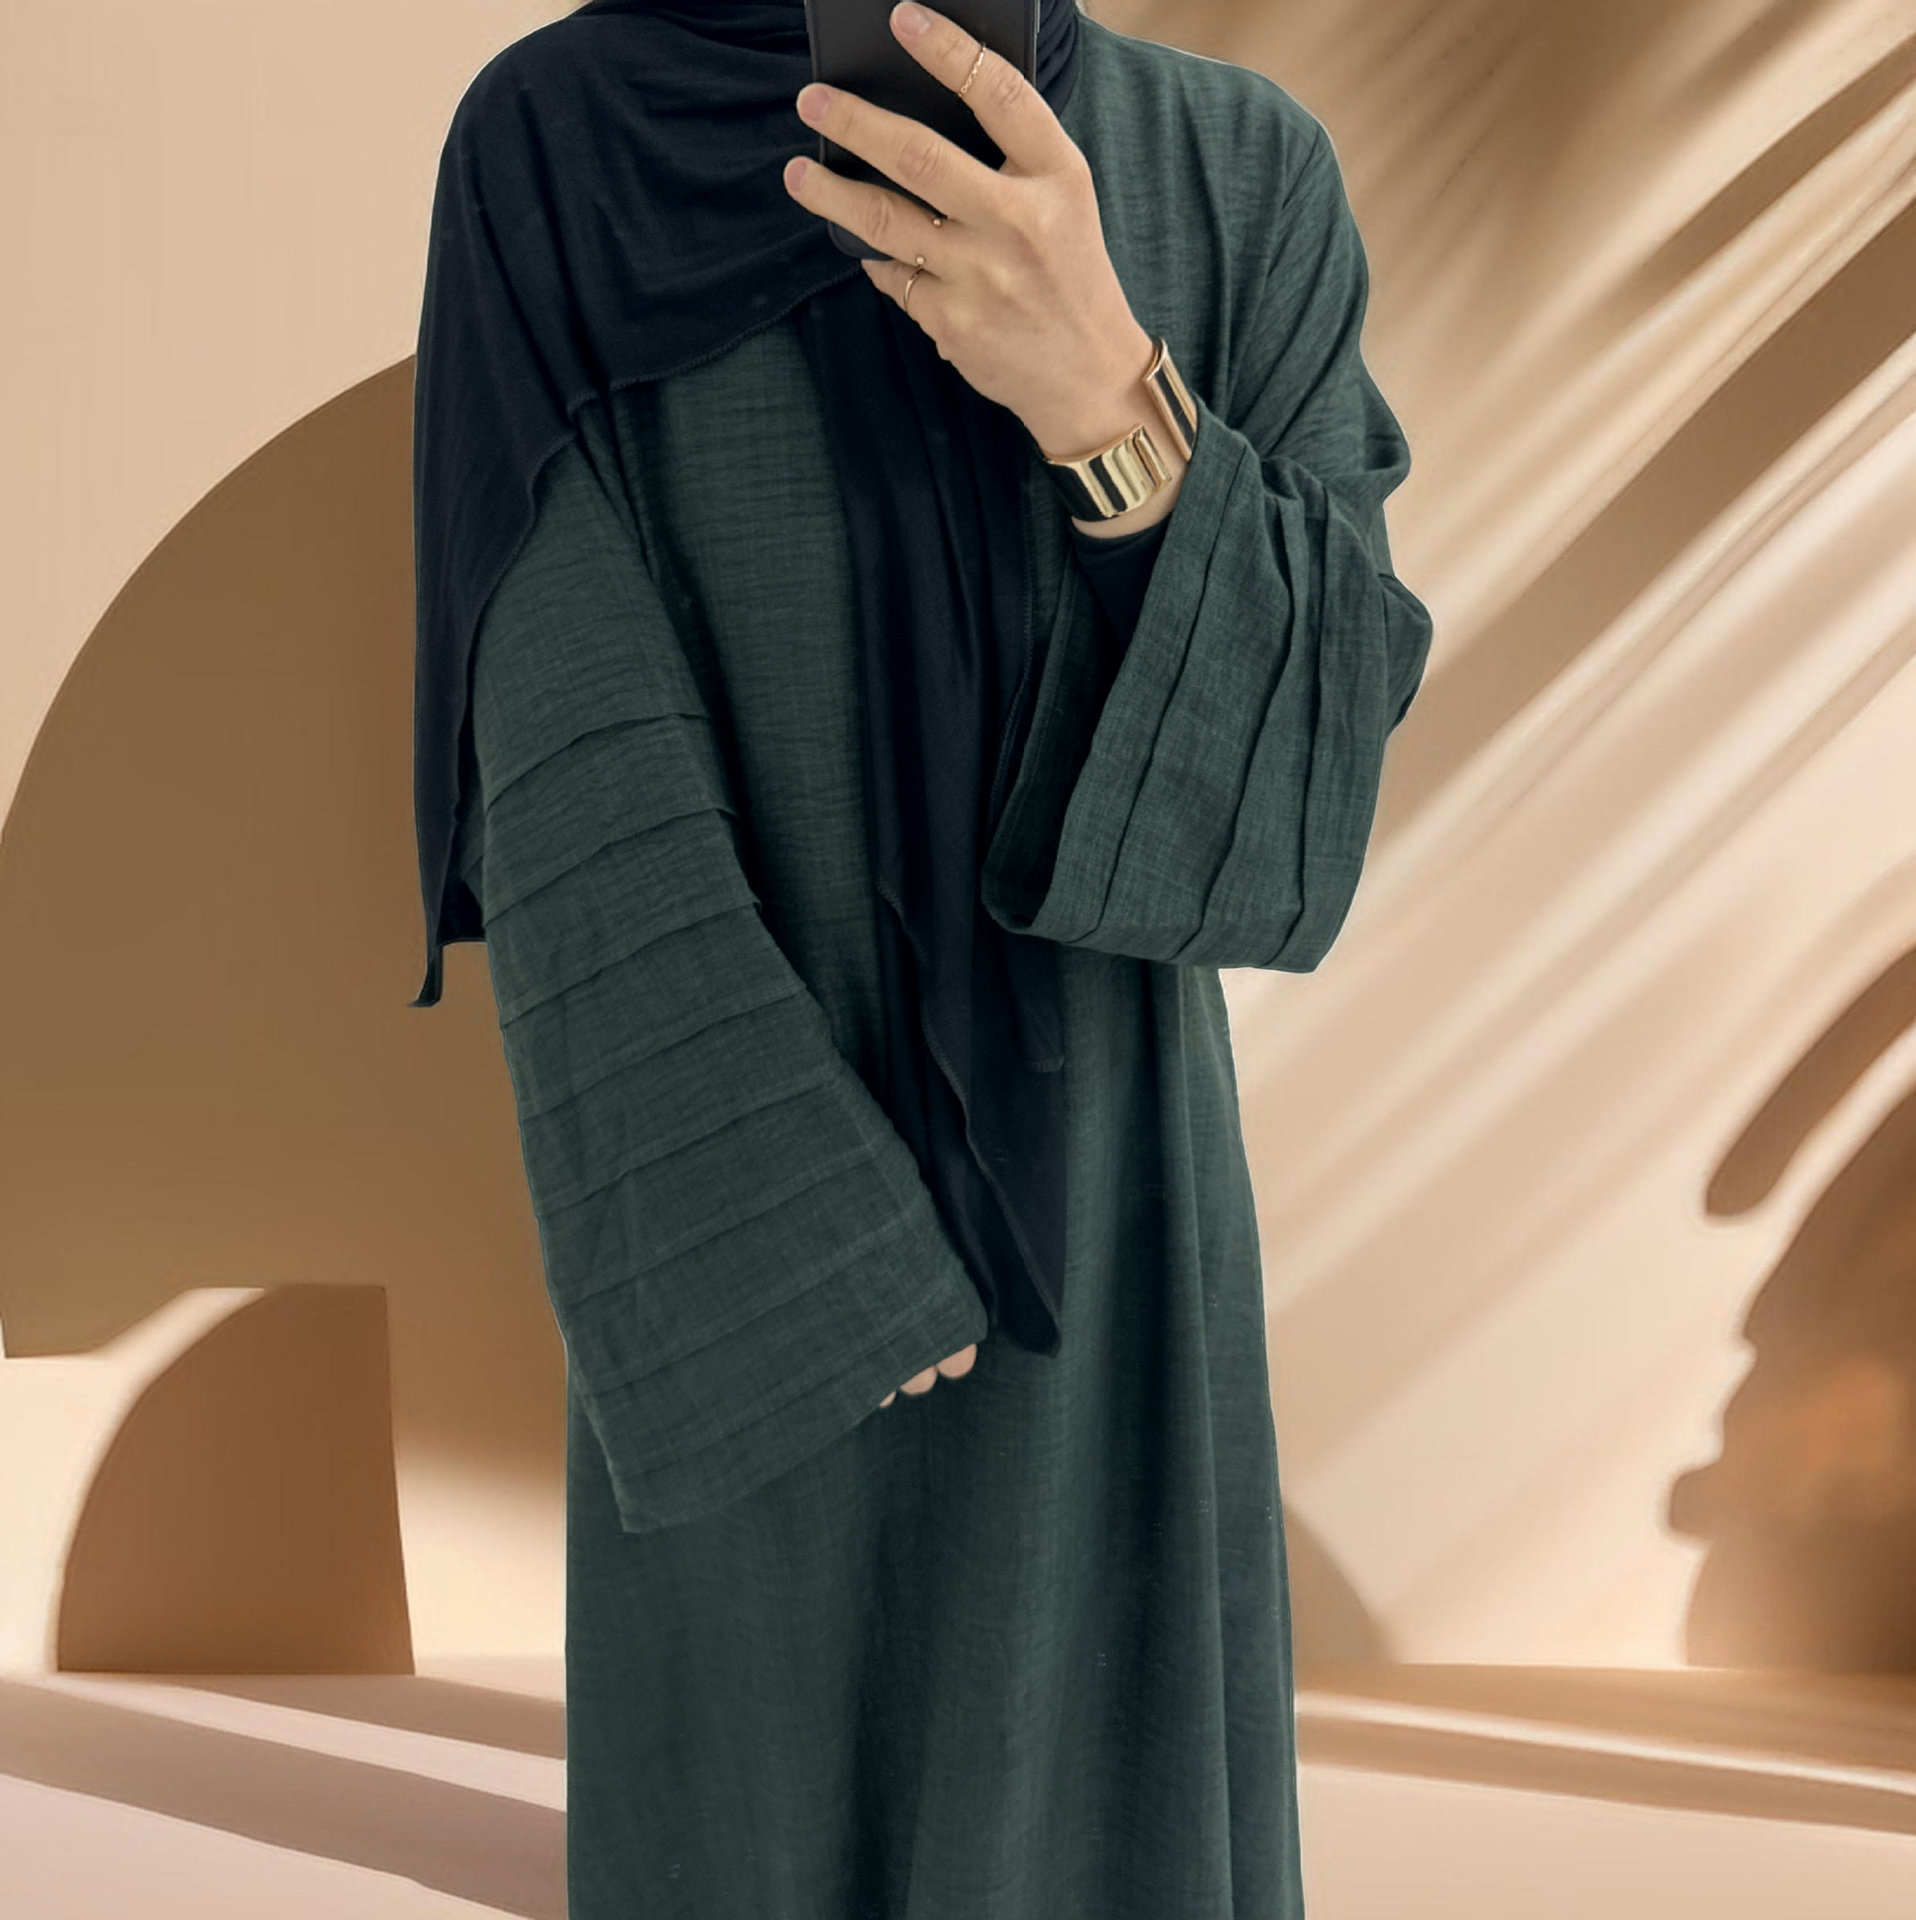 Everyday Comfort Abaya - Try Modest Limited 